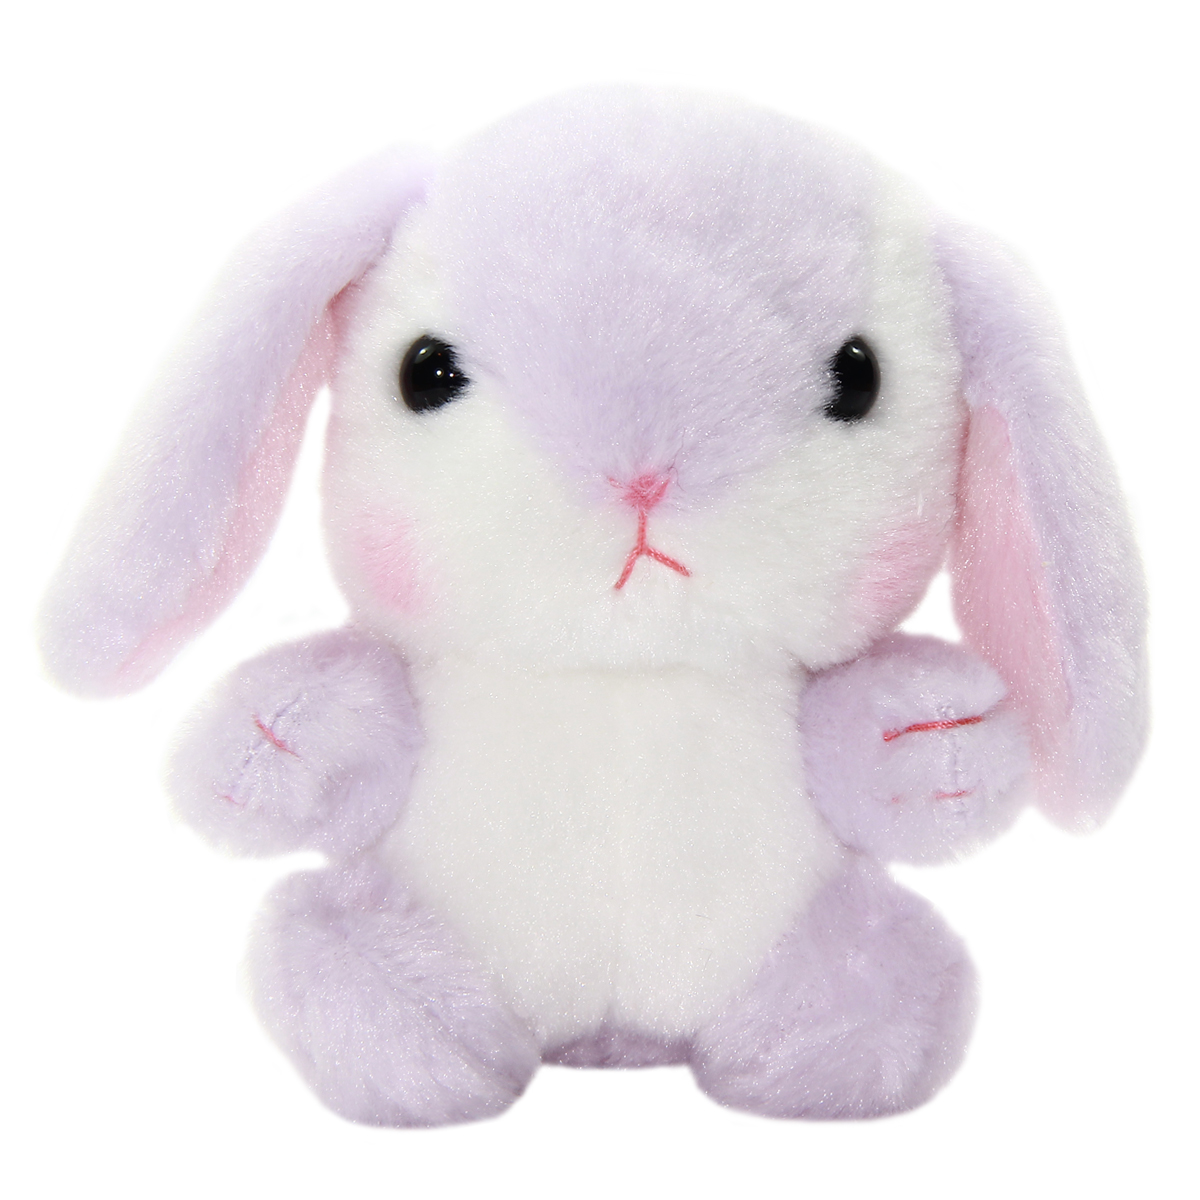 Amuse Gathering Bunny Plushie Collection Cute Stuffed Animal Toy White / Purple 4 Inches